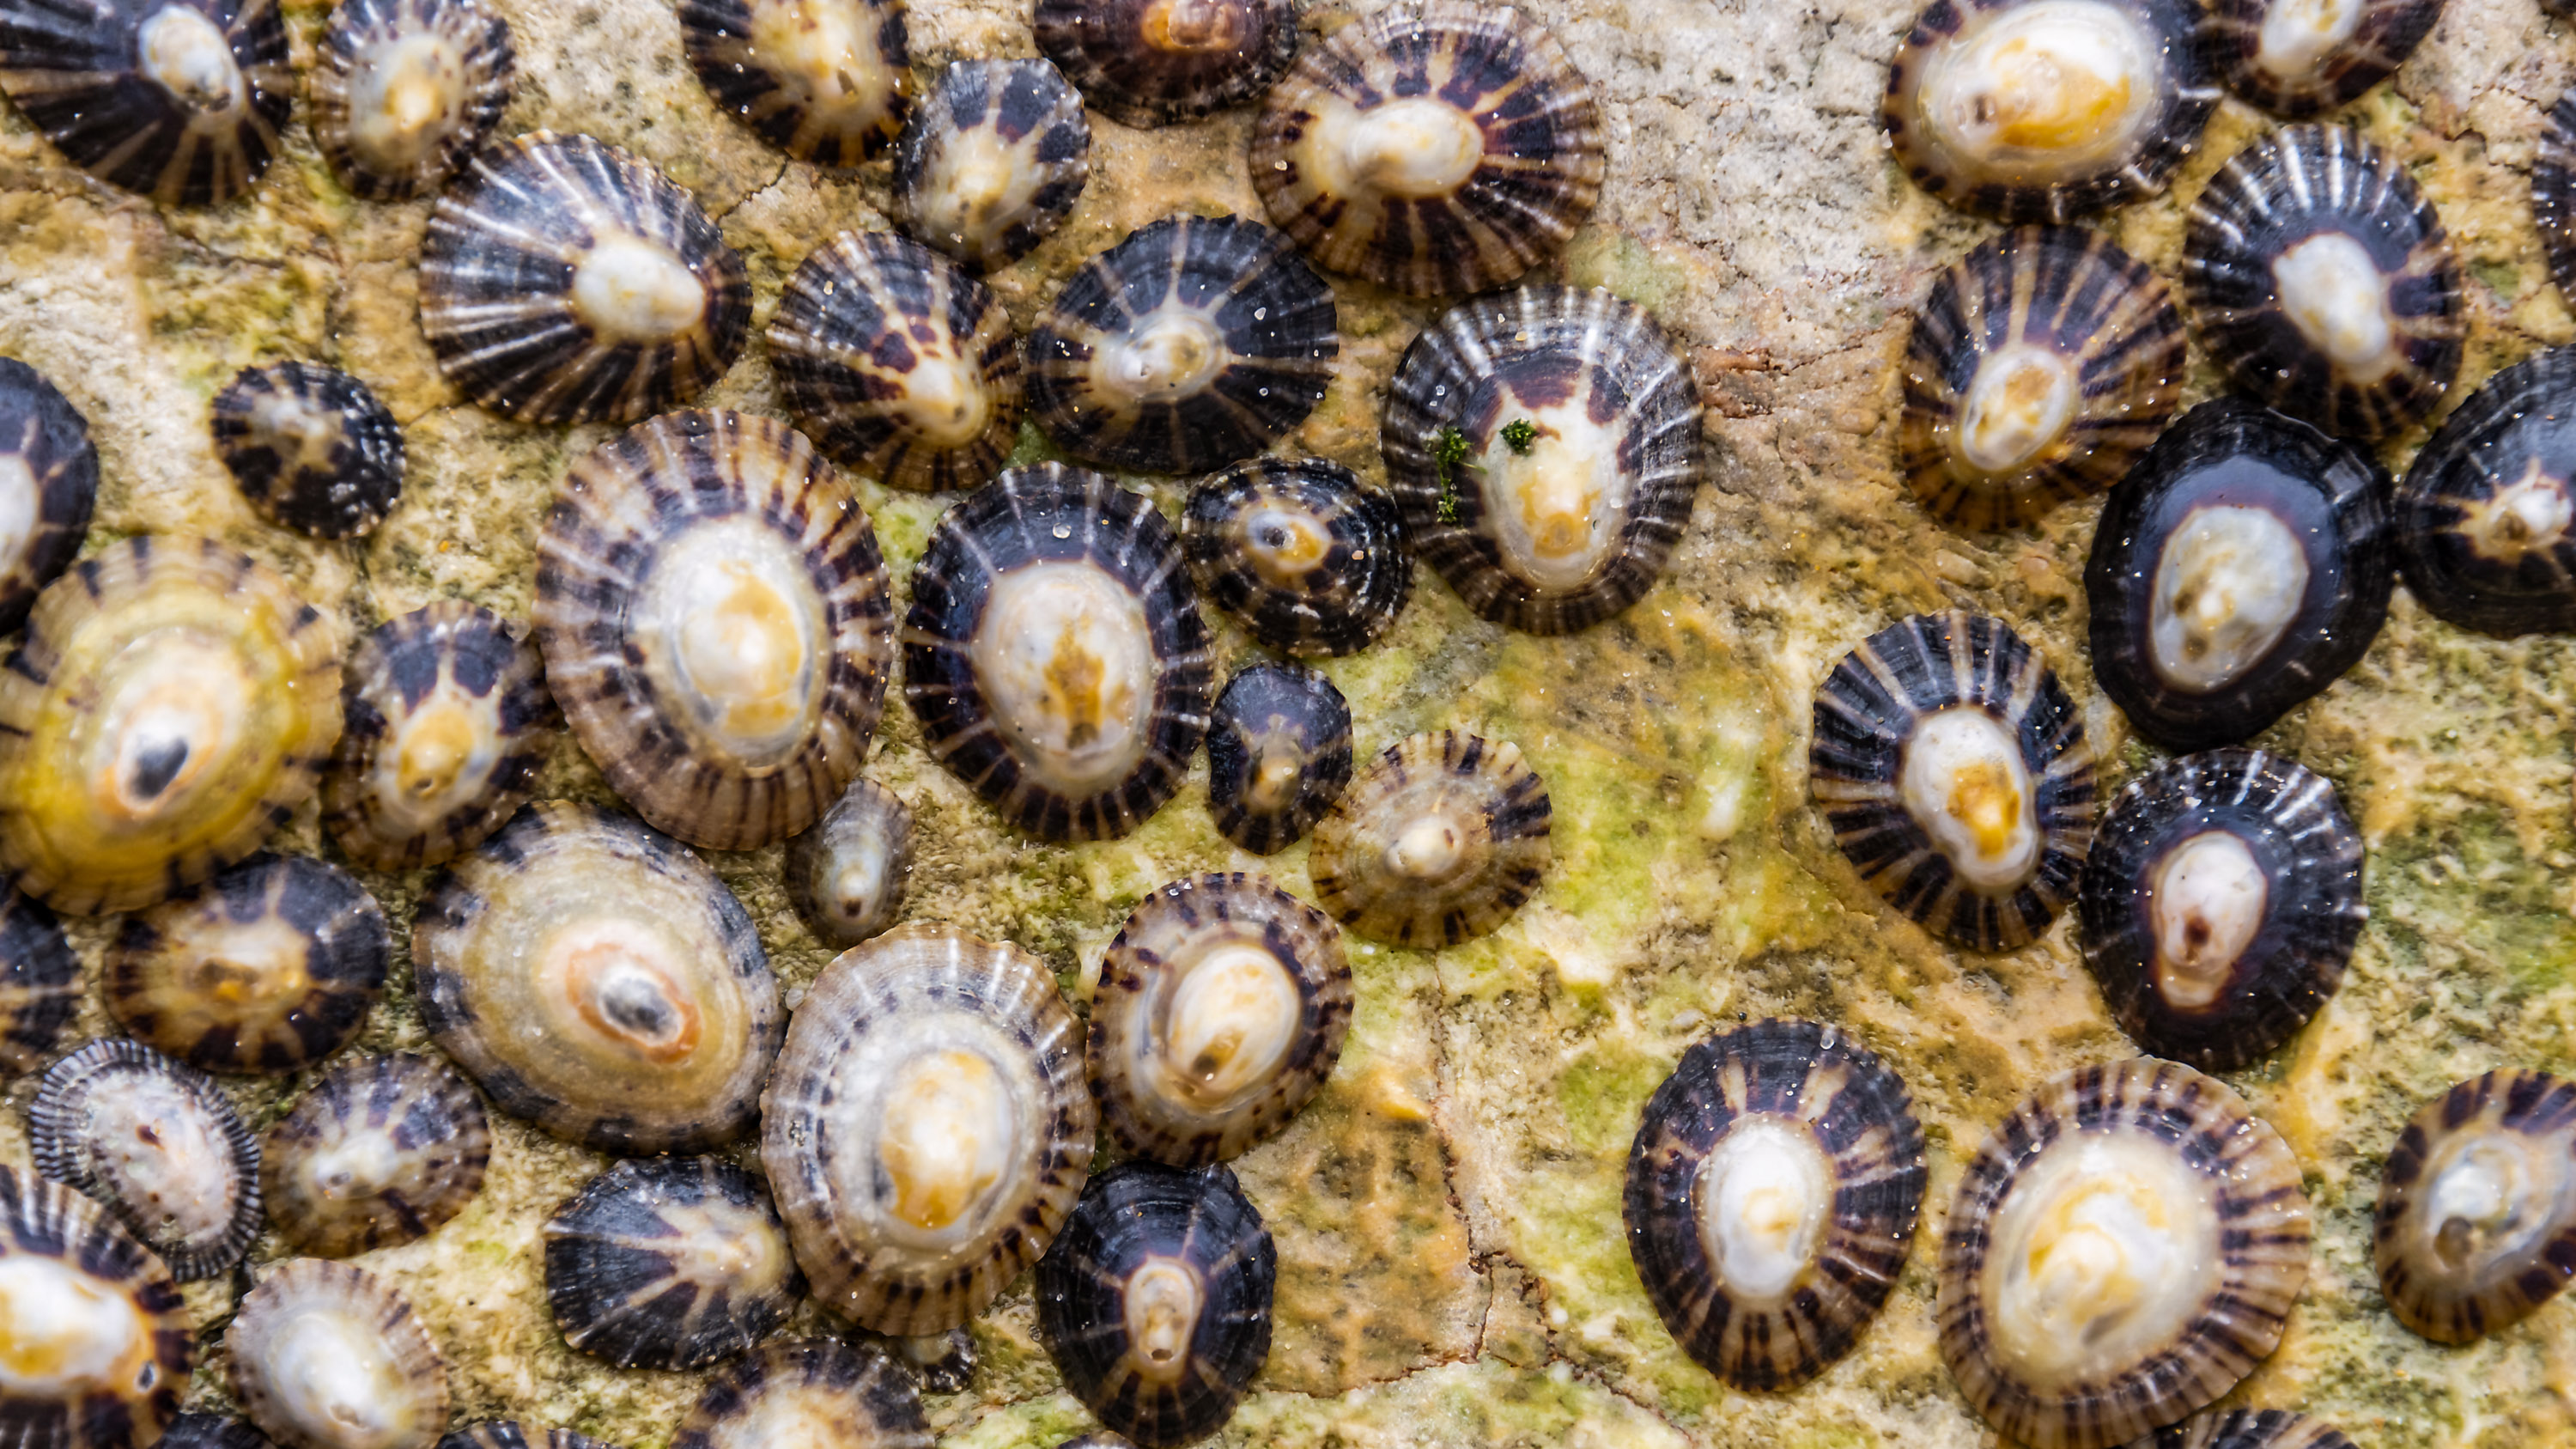 Several common limpets stuck on a beach rock.